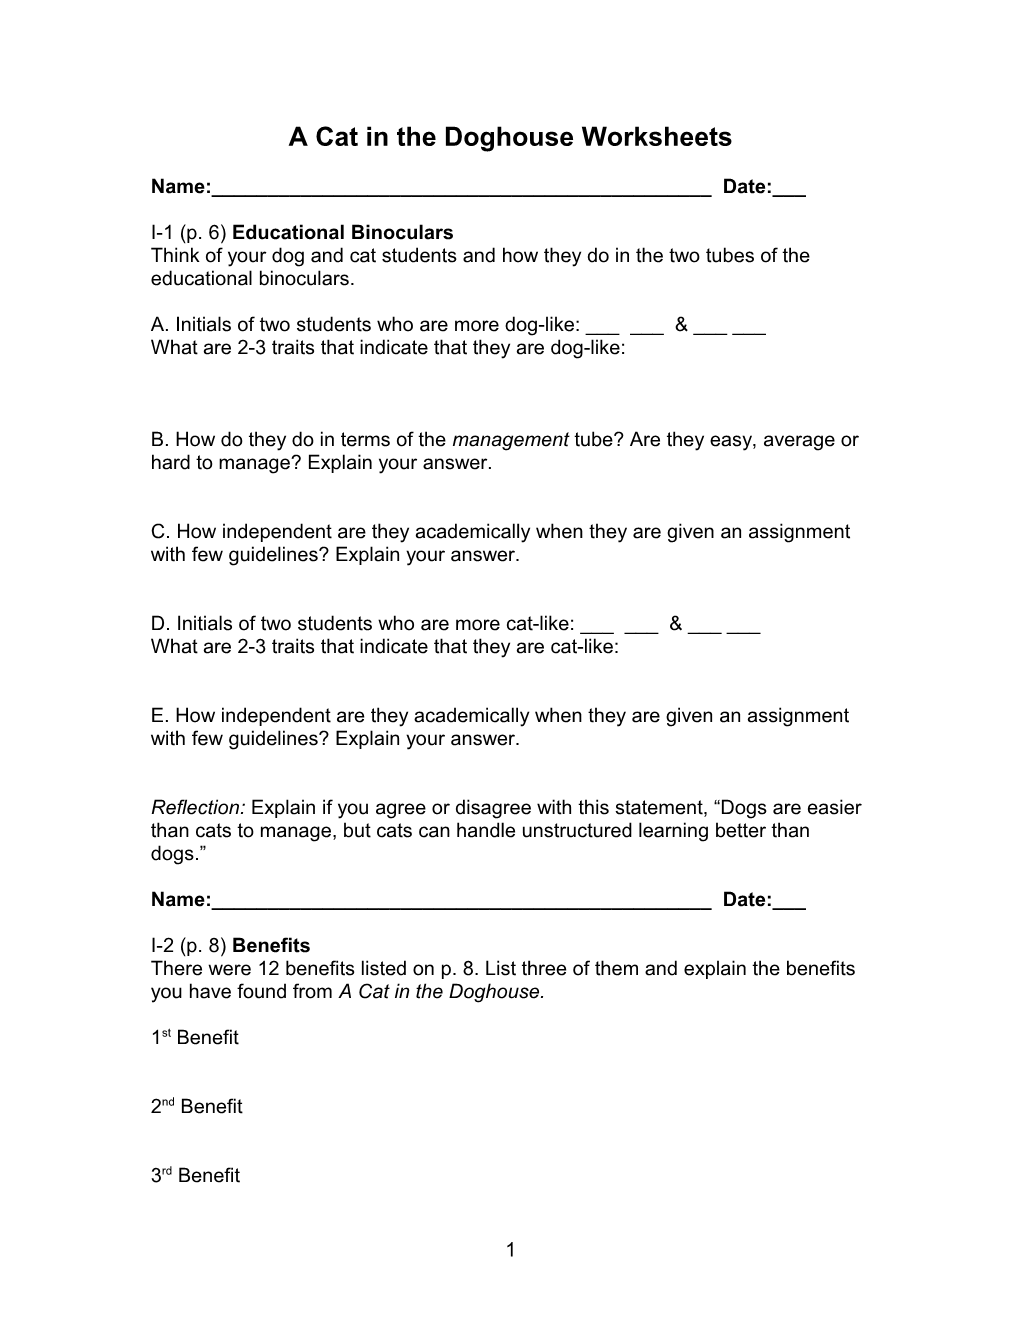 A Cat in the Doghouse Worksheets